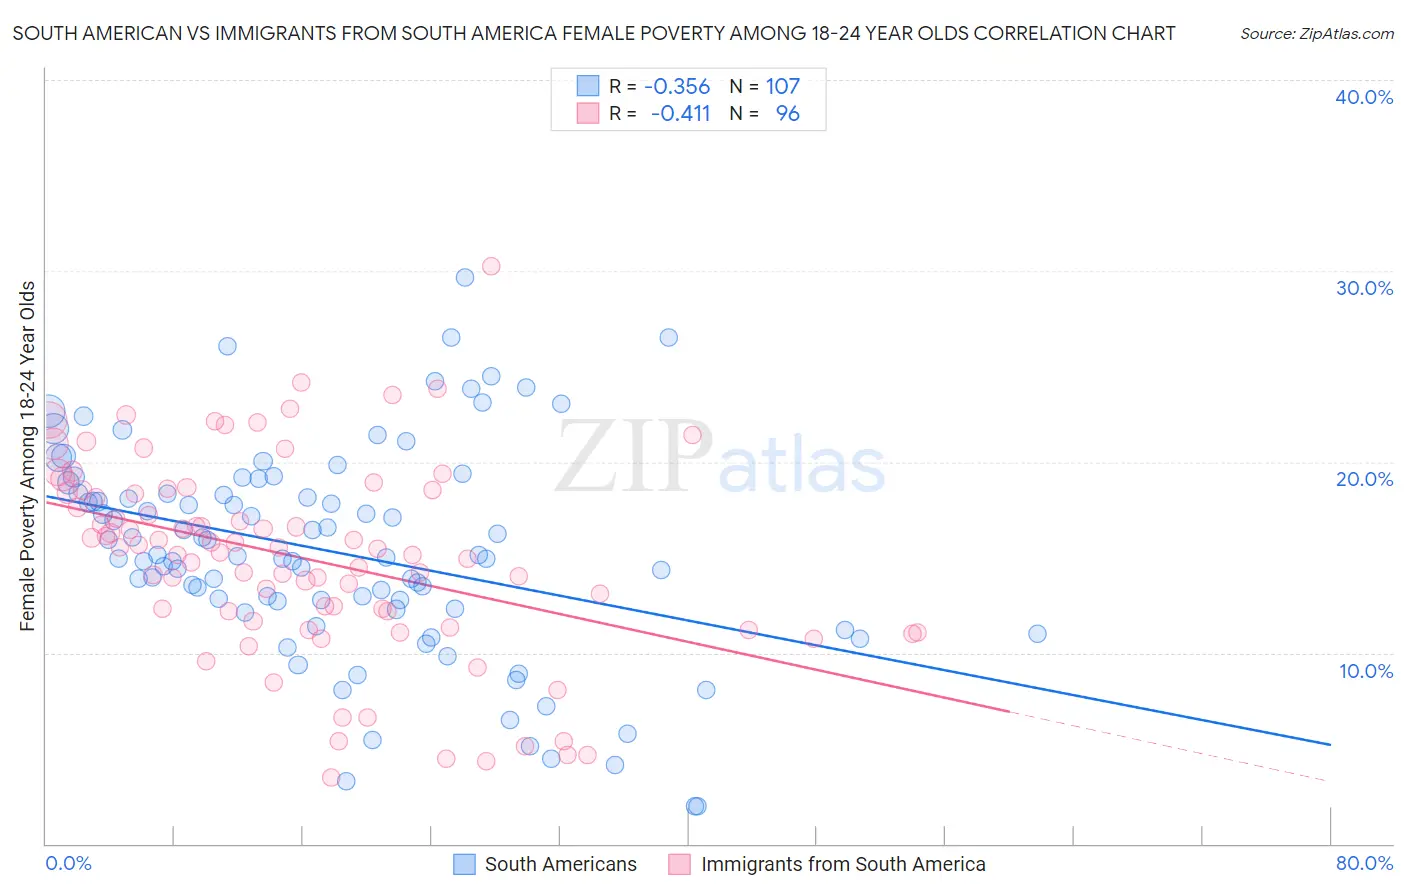 South American vs Immigrants from South America Female Poverty Among 18-24 Year Olds